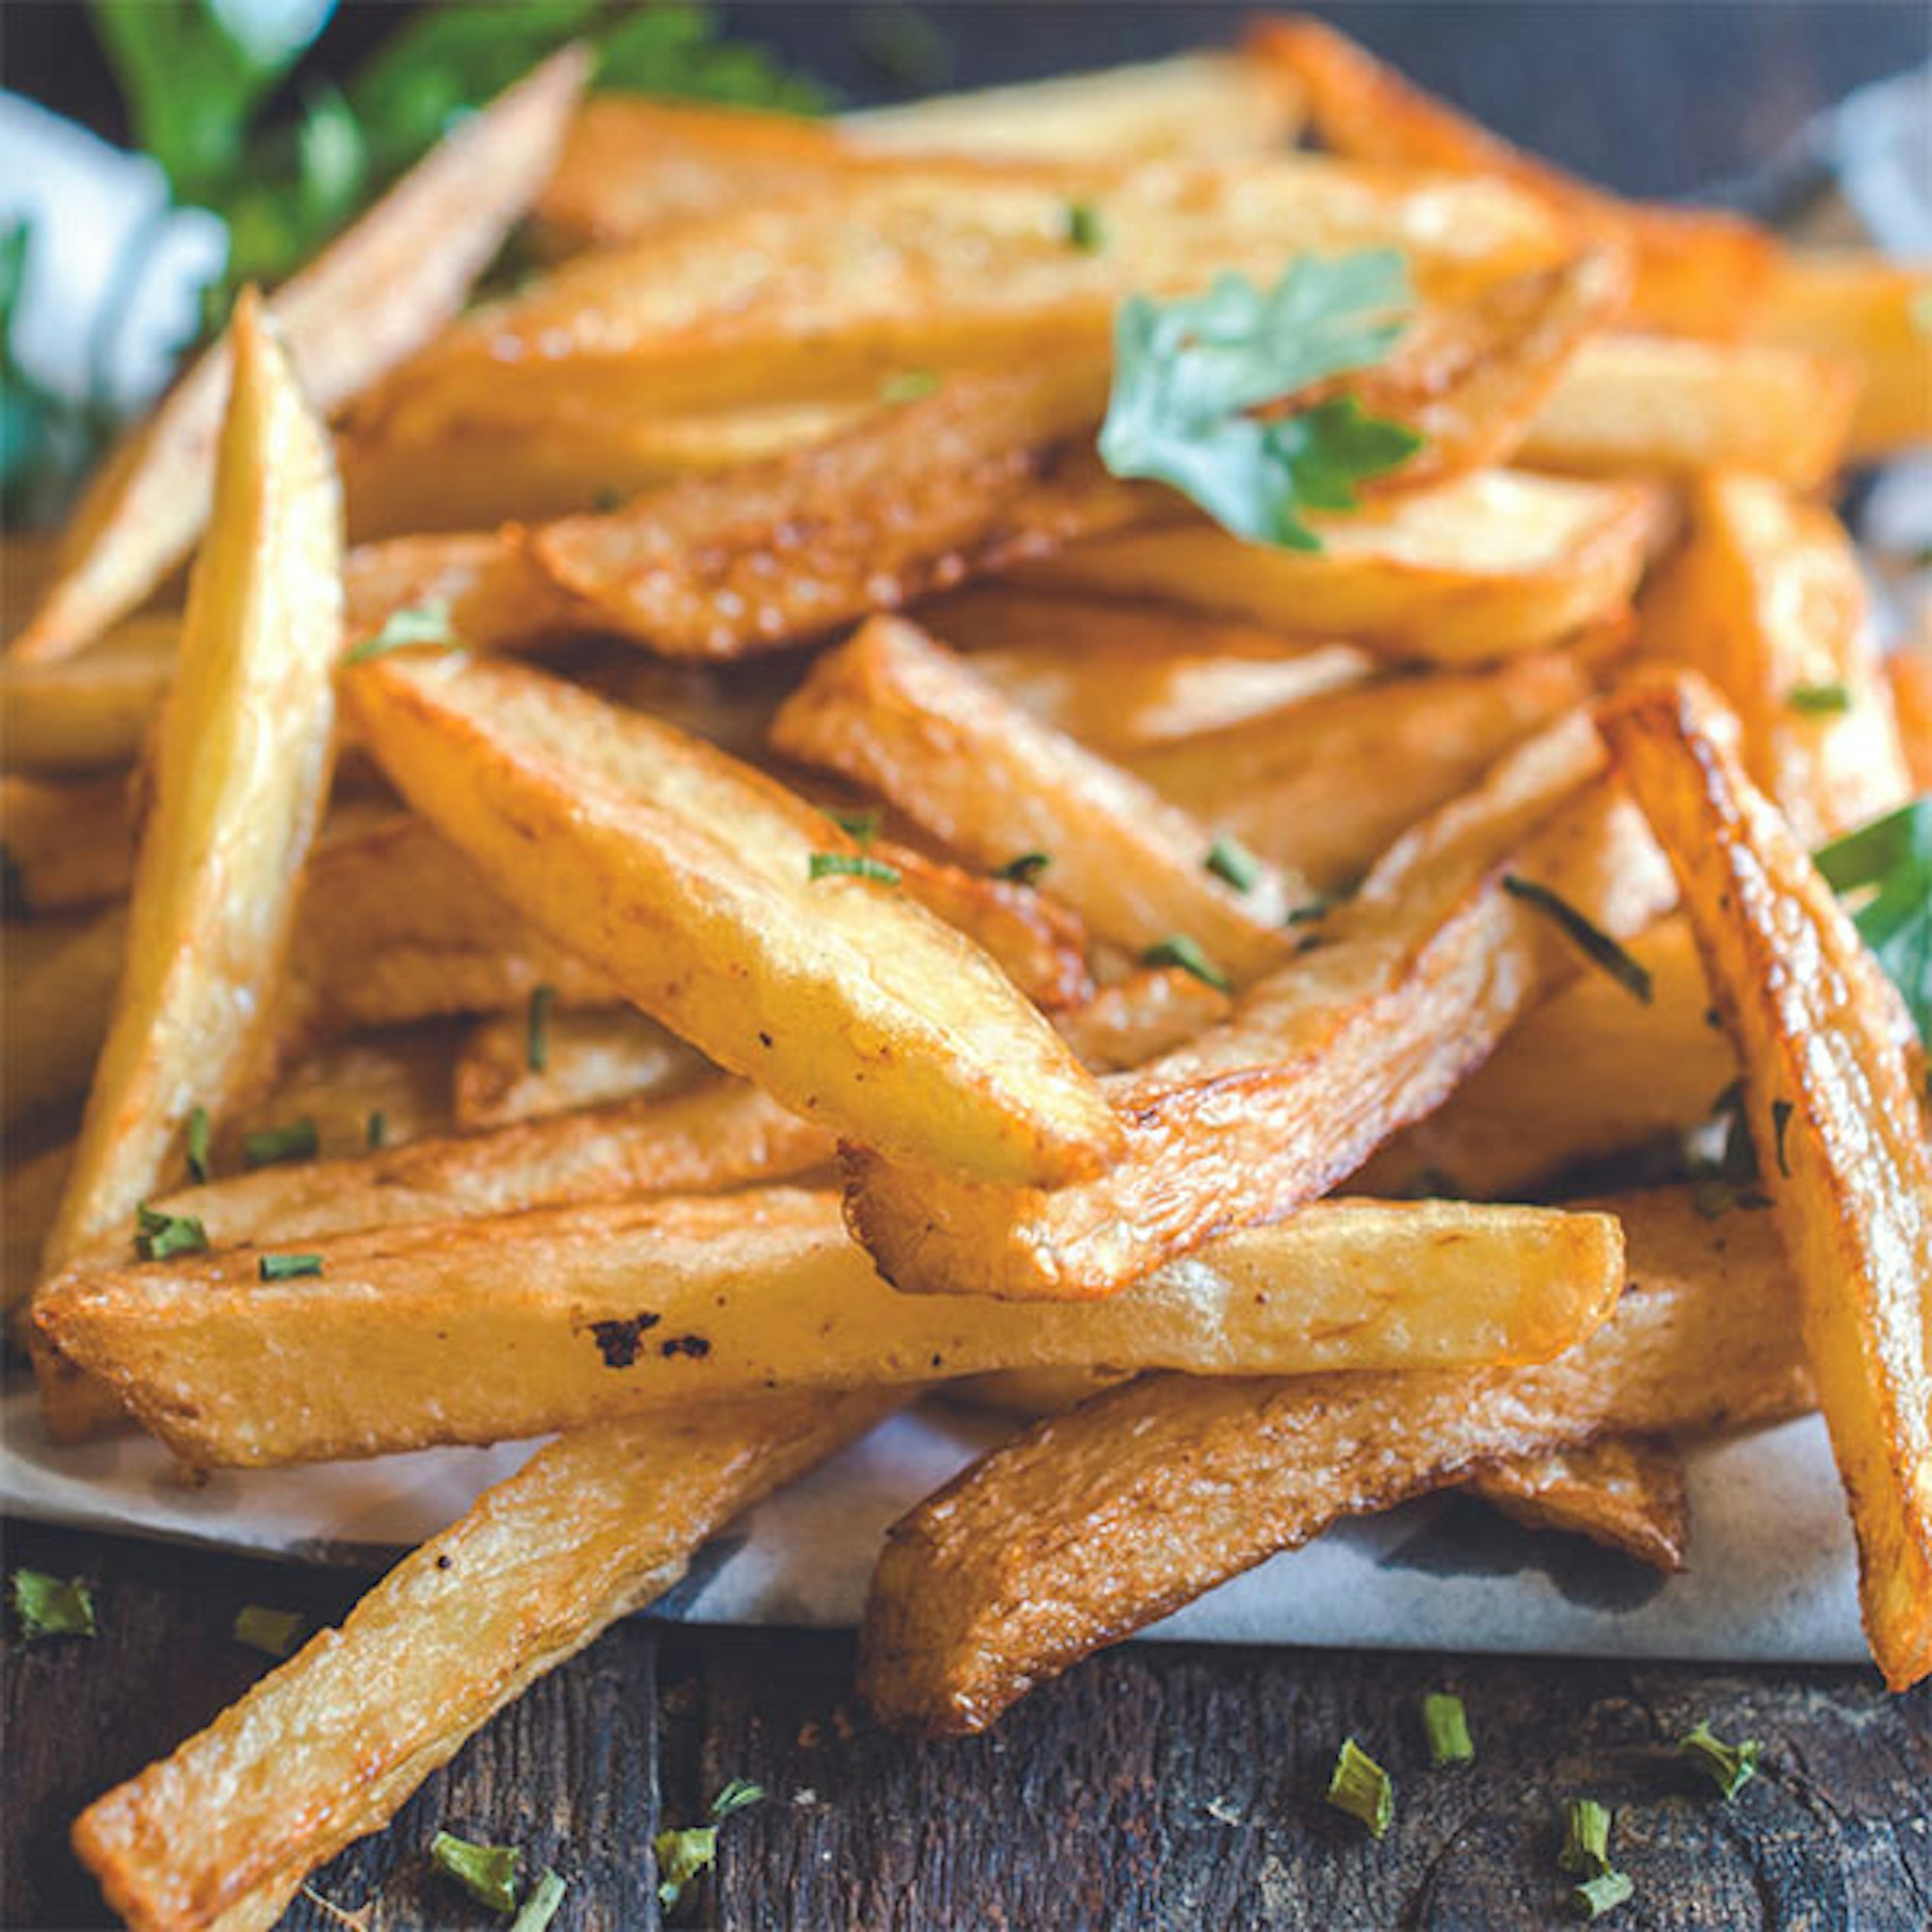 Air Fryer Crispy Home Made Fries recipe. Baccarat The Healthy Fry 9L Air Fryer.